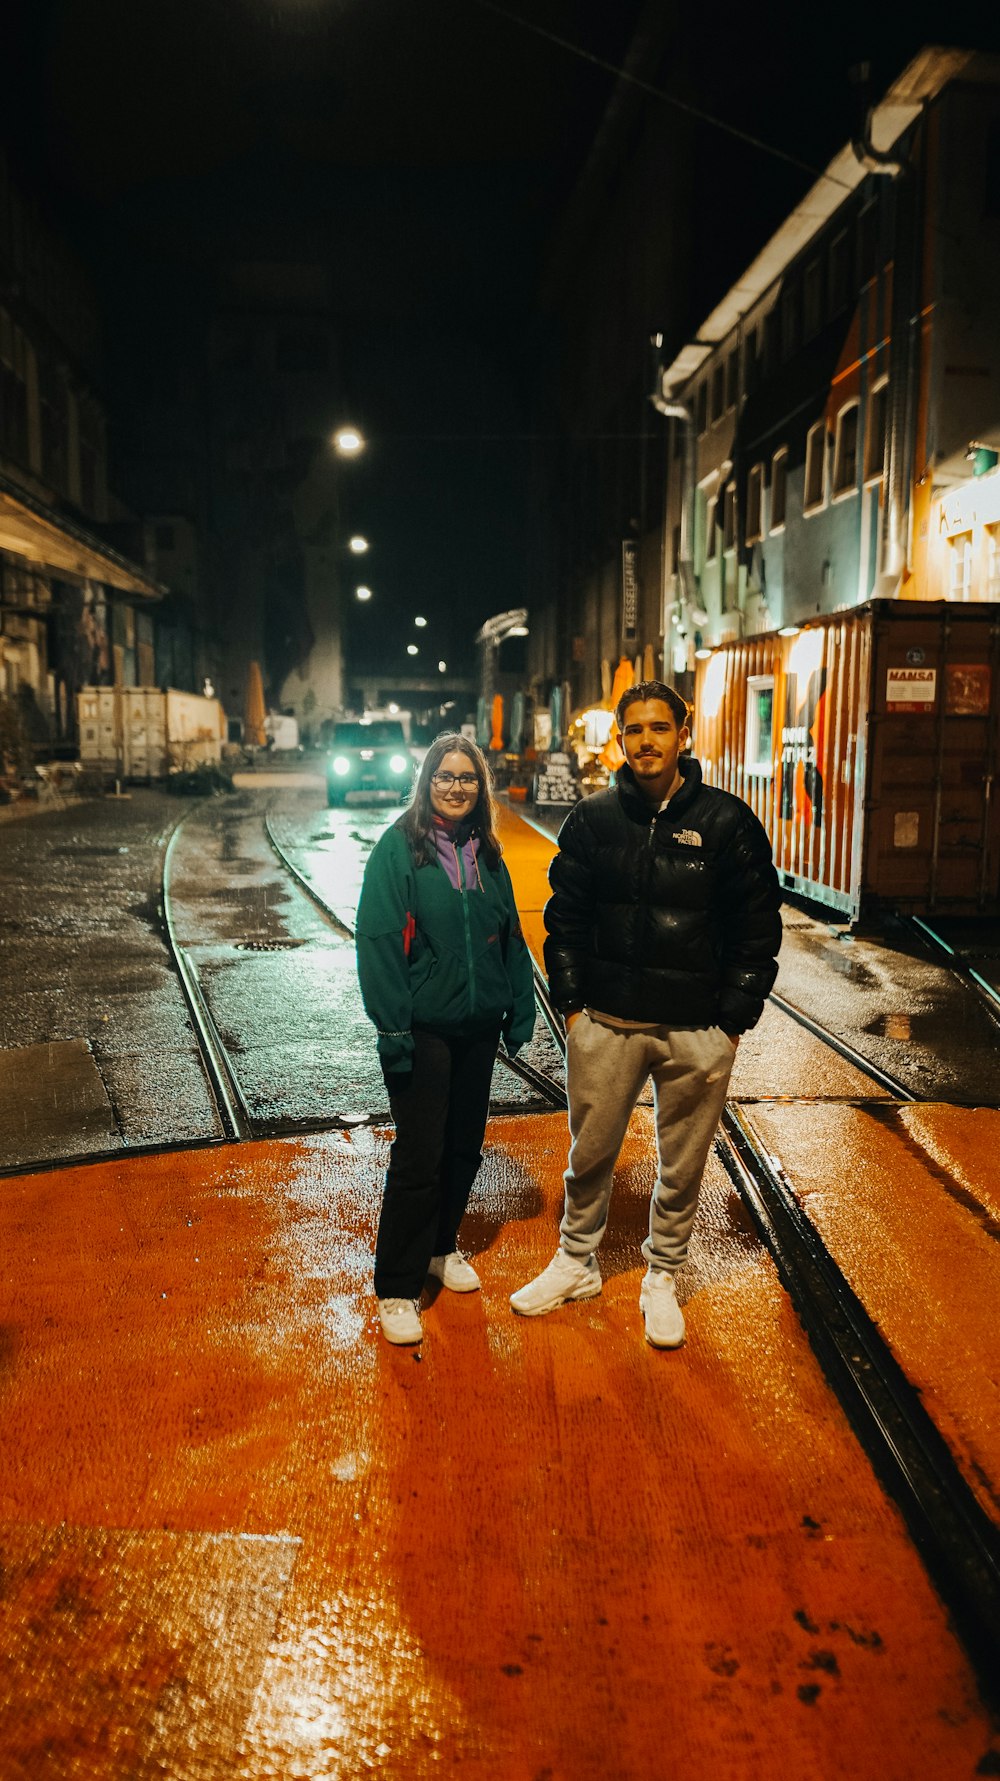 a man and woman standing on a wet street at night